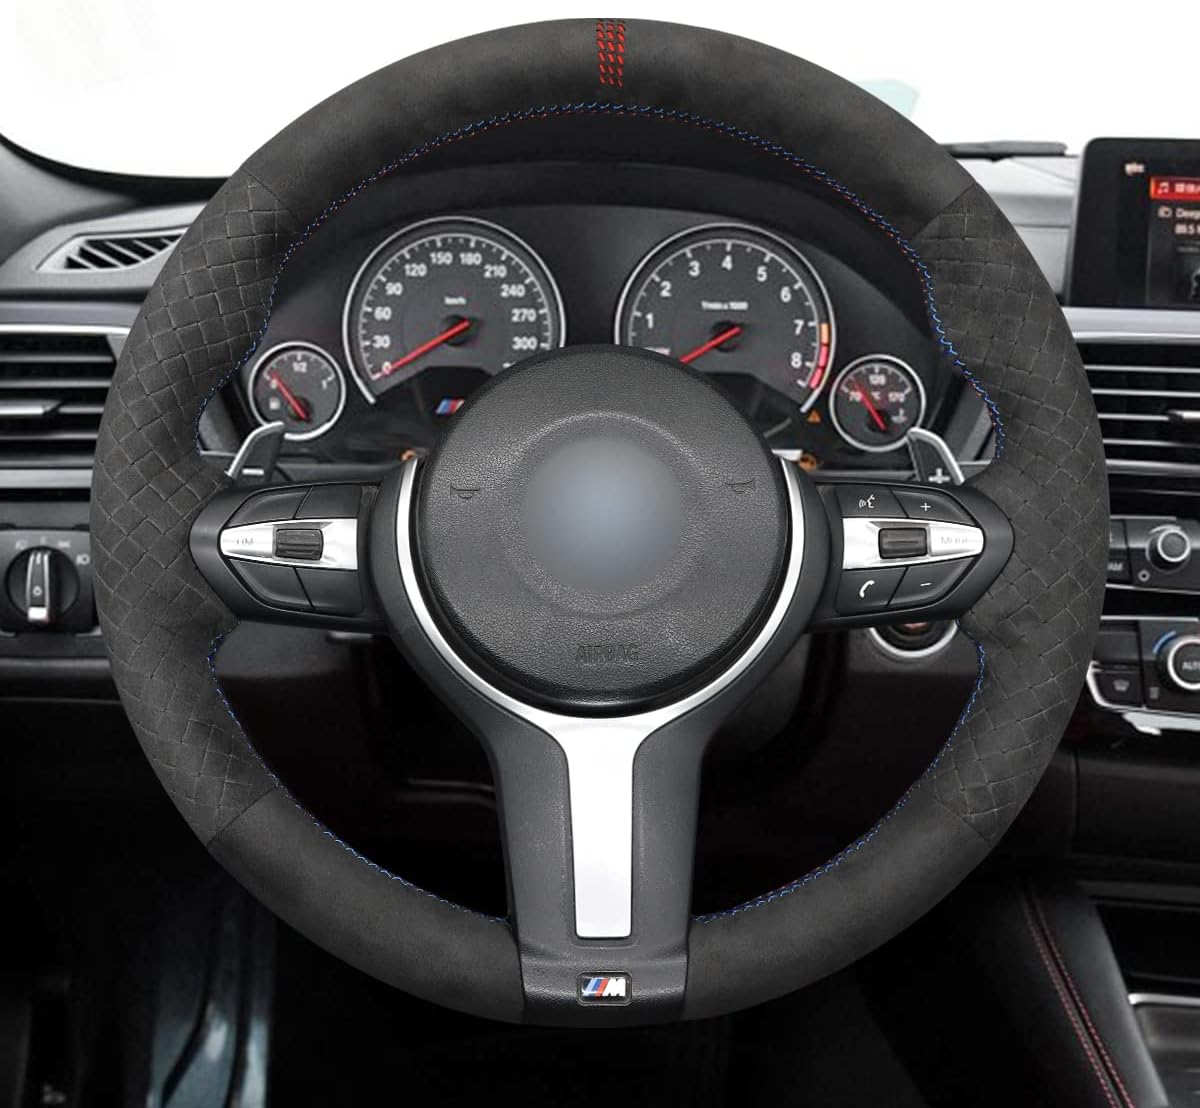 Car steering wheel cover for BMW